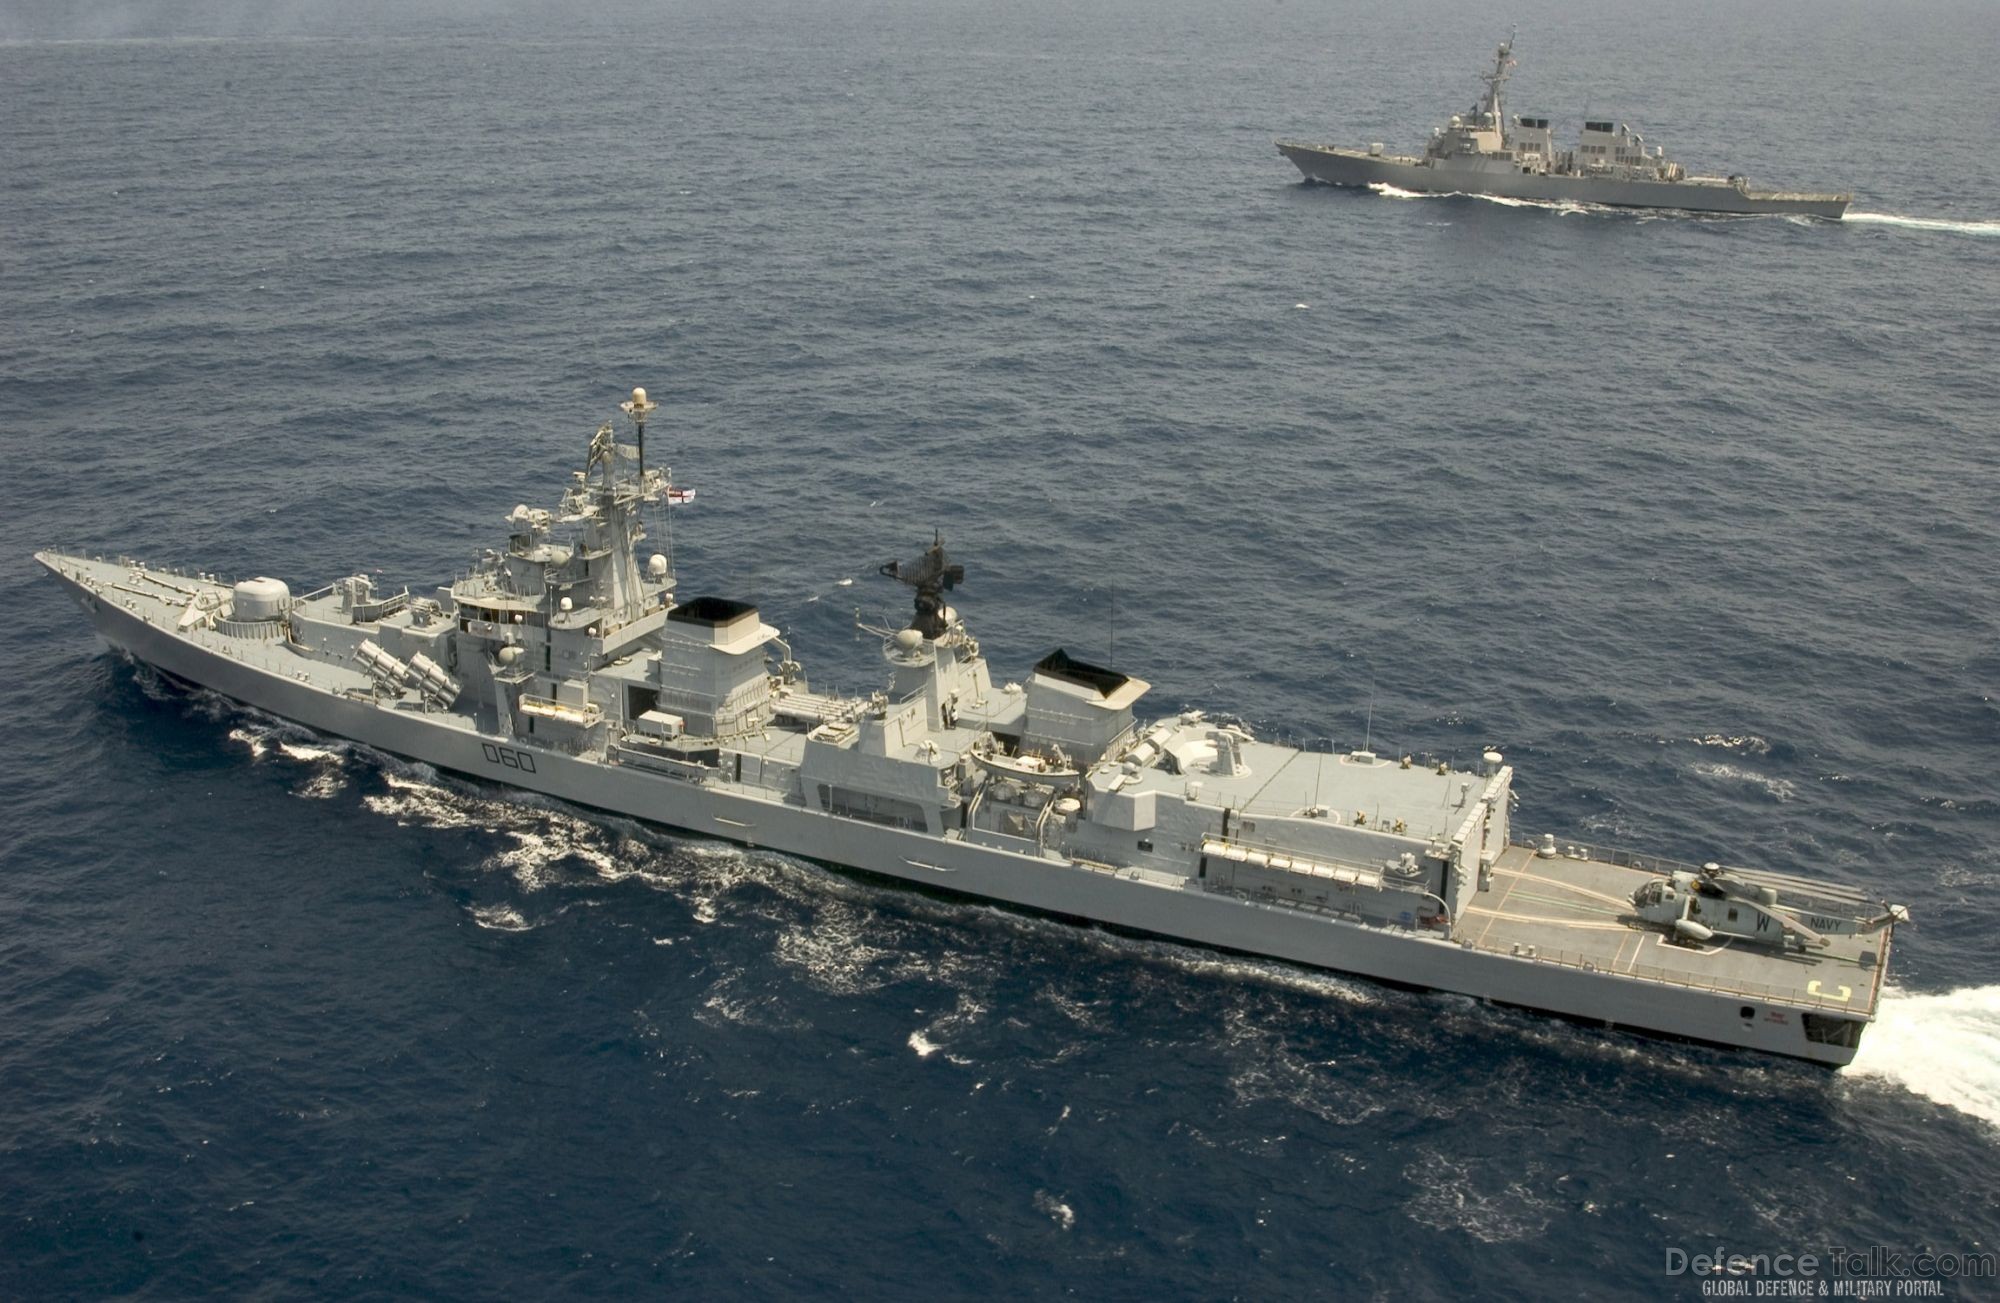 Indian Navy guided-missile destroyer - US, Indian Navy Exercise